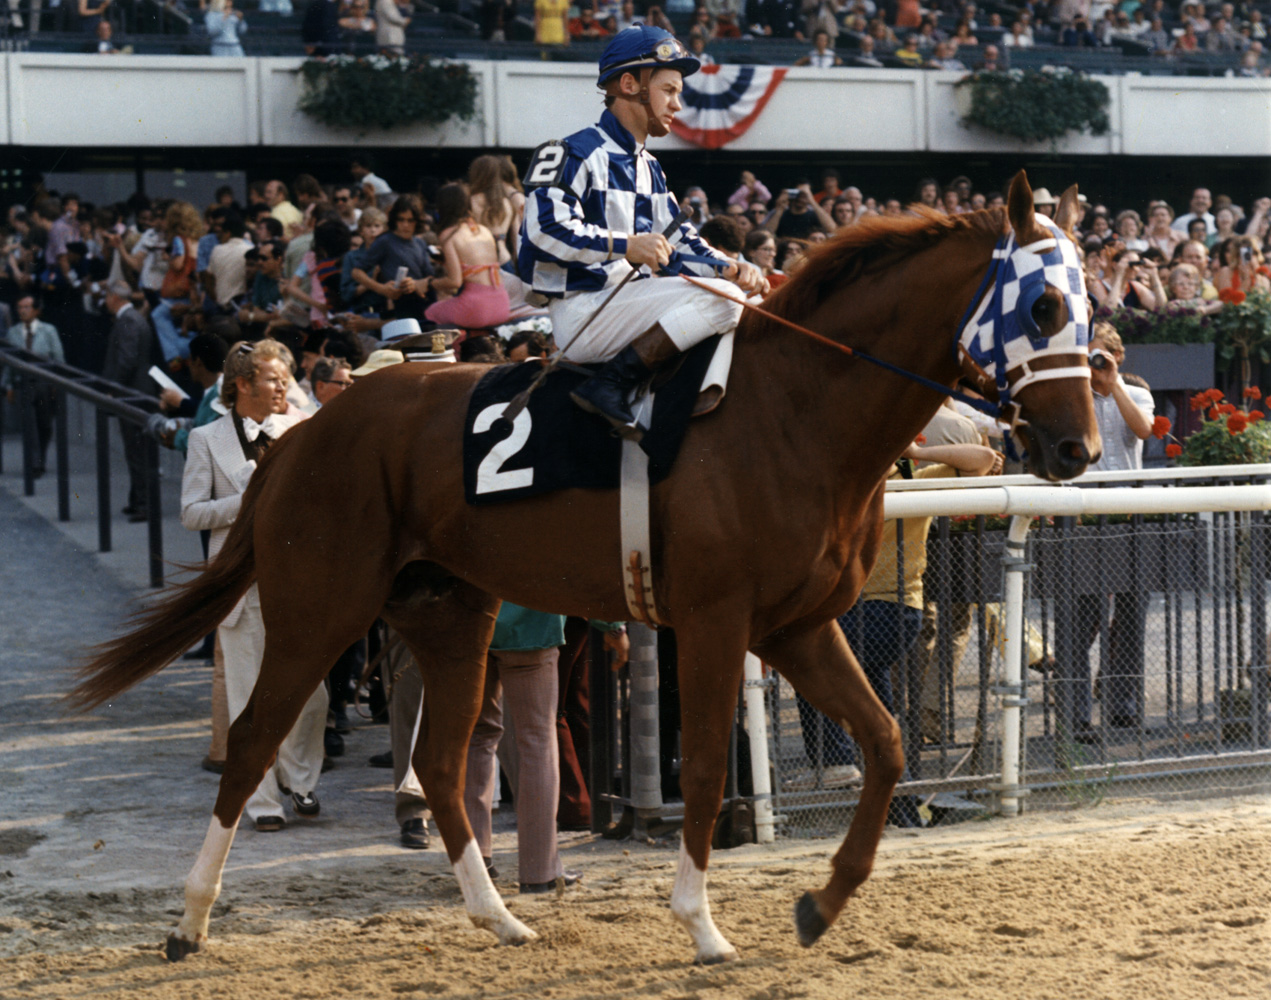 Ron Turcotte and Secretariat entering the track for the 1973 Belmont Stakes (Bob Coglianese/Museum Collection)